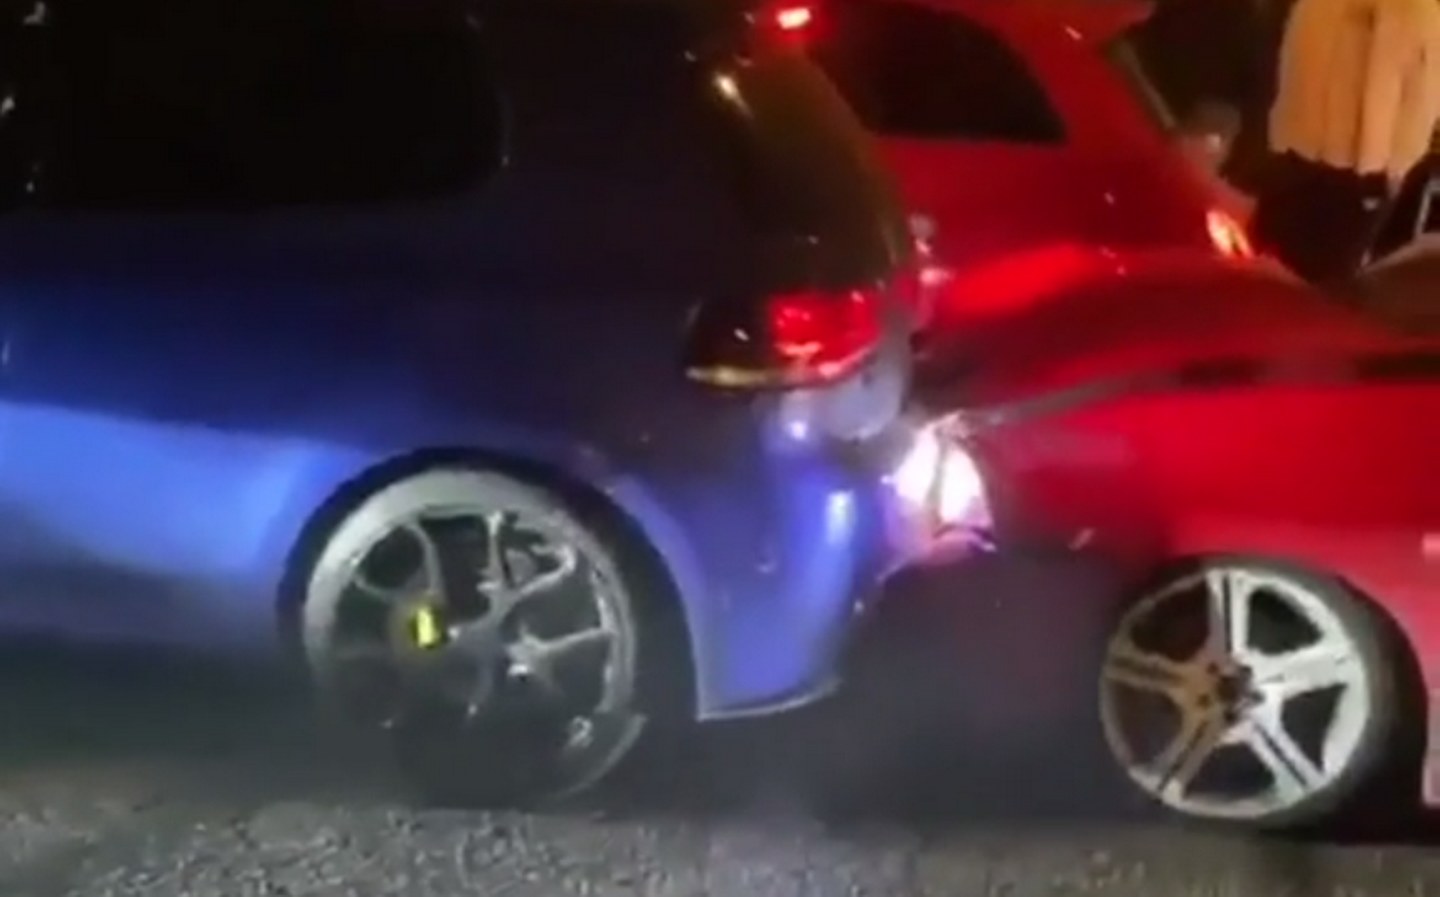 VW Golf R and Seat Ibiza crash - from Reddit video uploaded by user rodharet